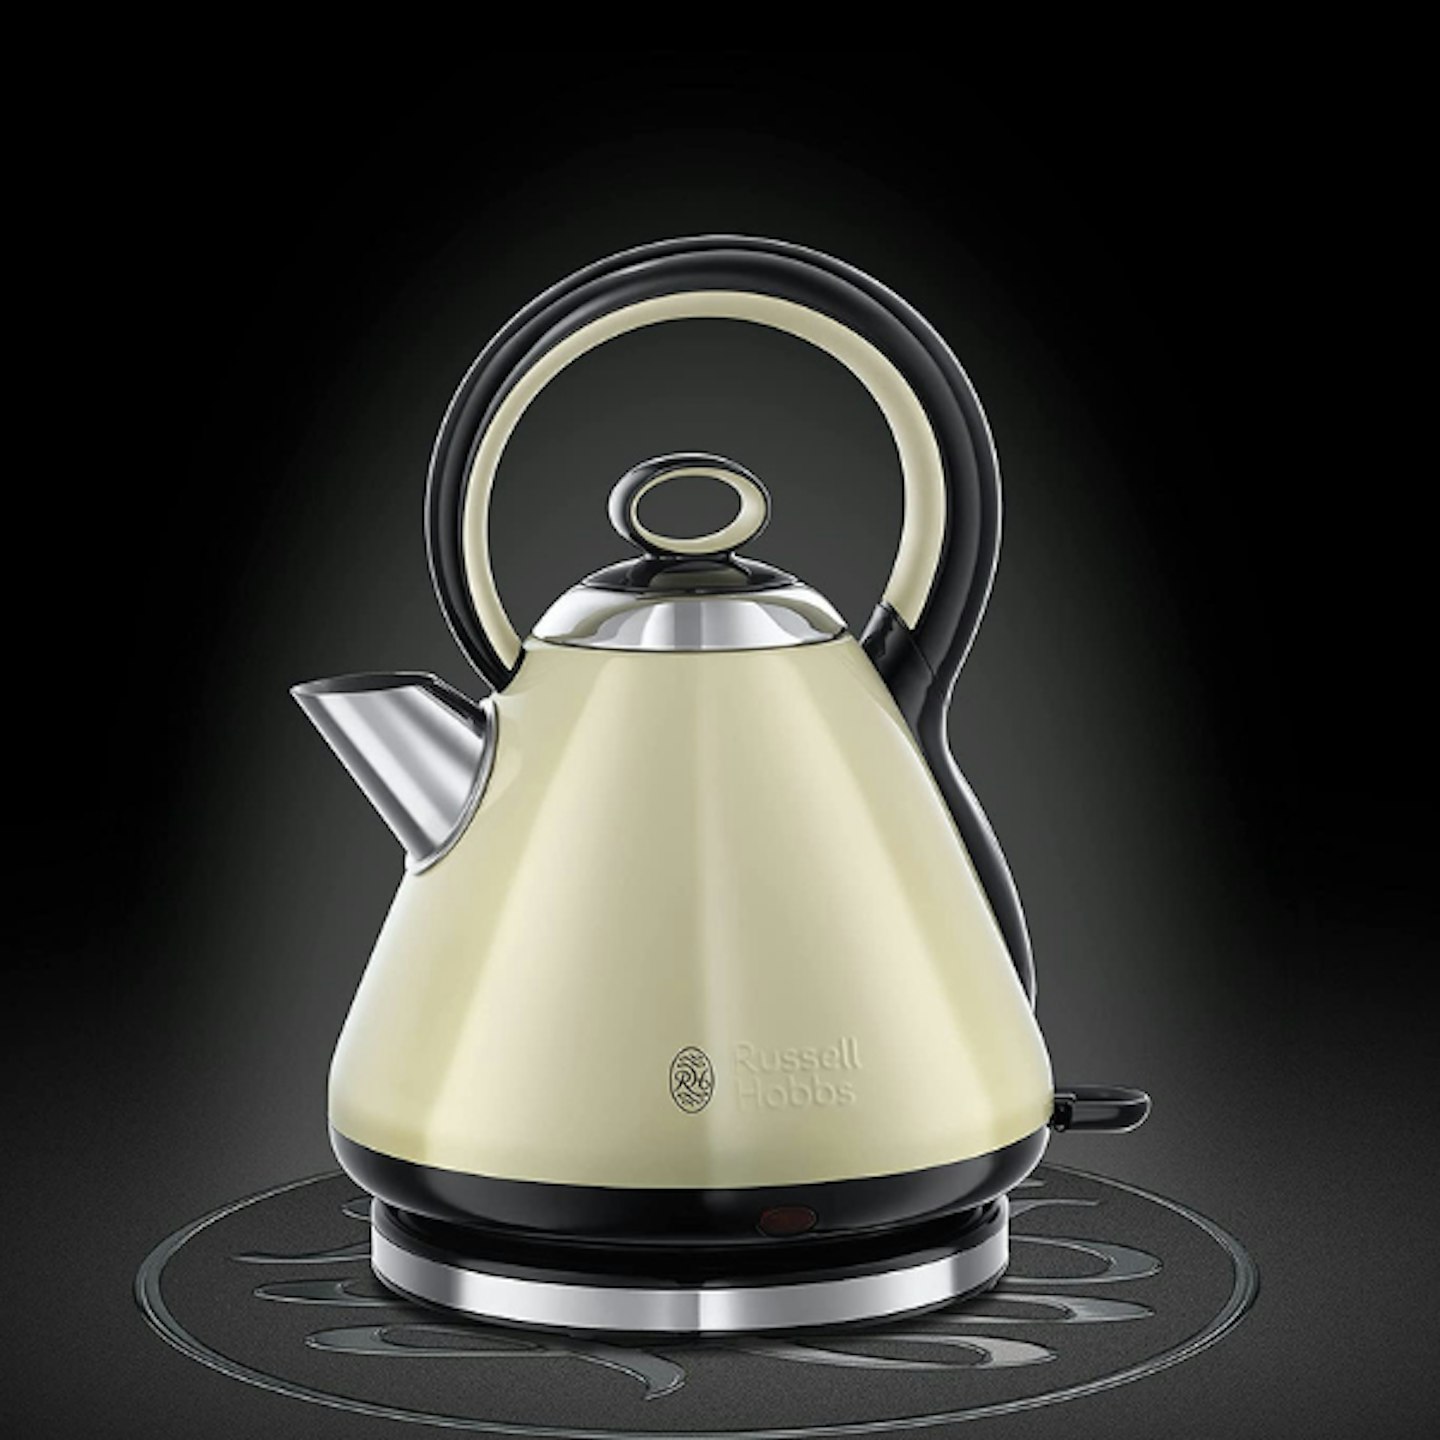 Russell Hobbs 21888 Legacy Quiet Boil Electric Kettle - Cream